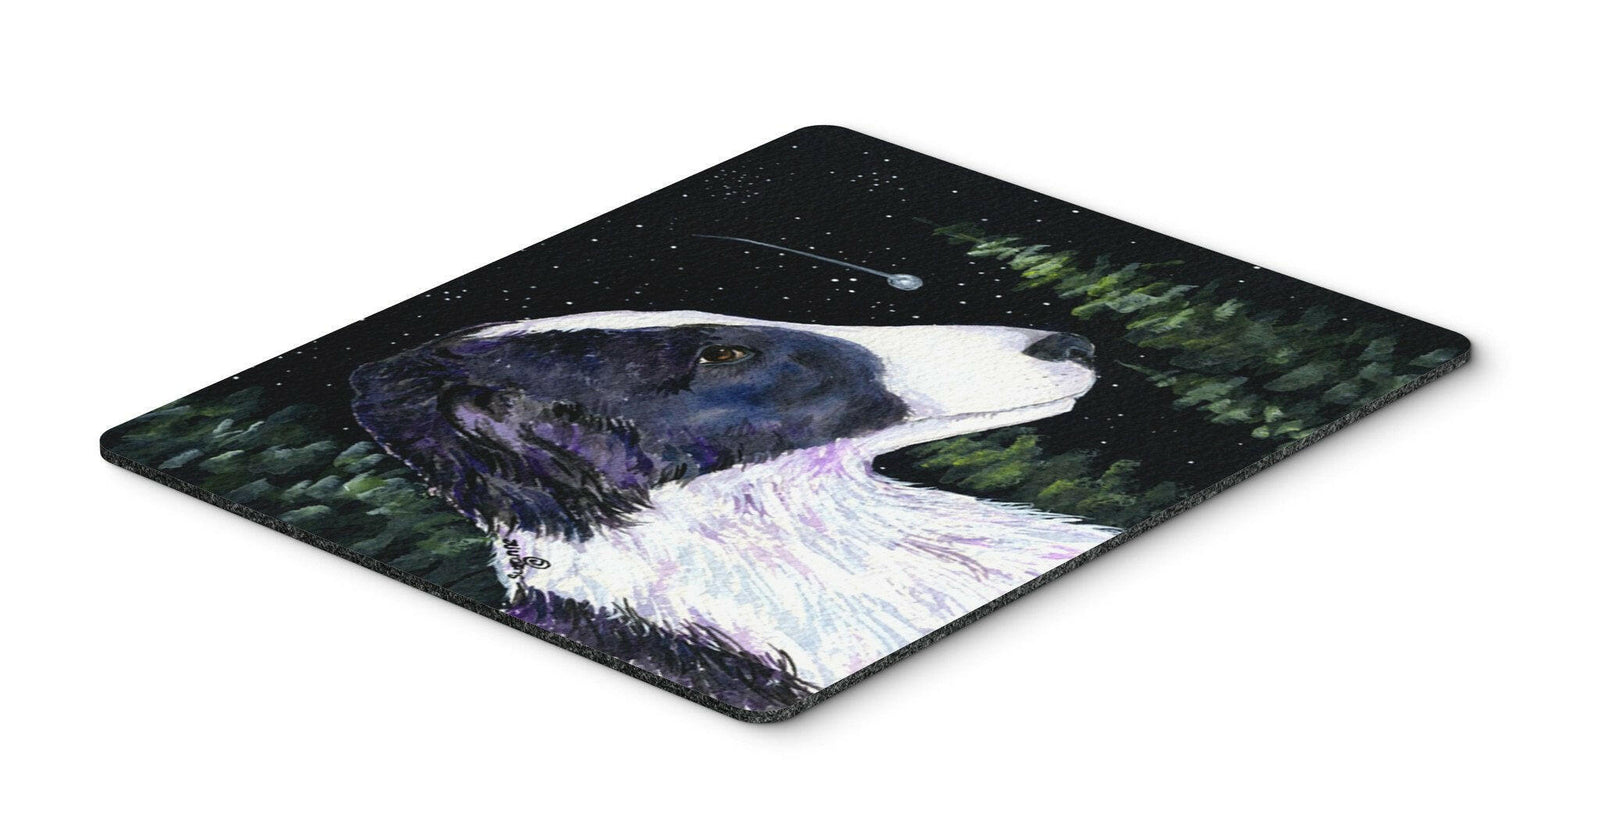 Starry Night Border Collie Mouse pad, hot pad, or trivet by Caroline's Treasures